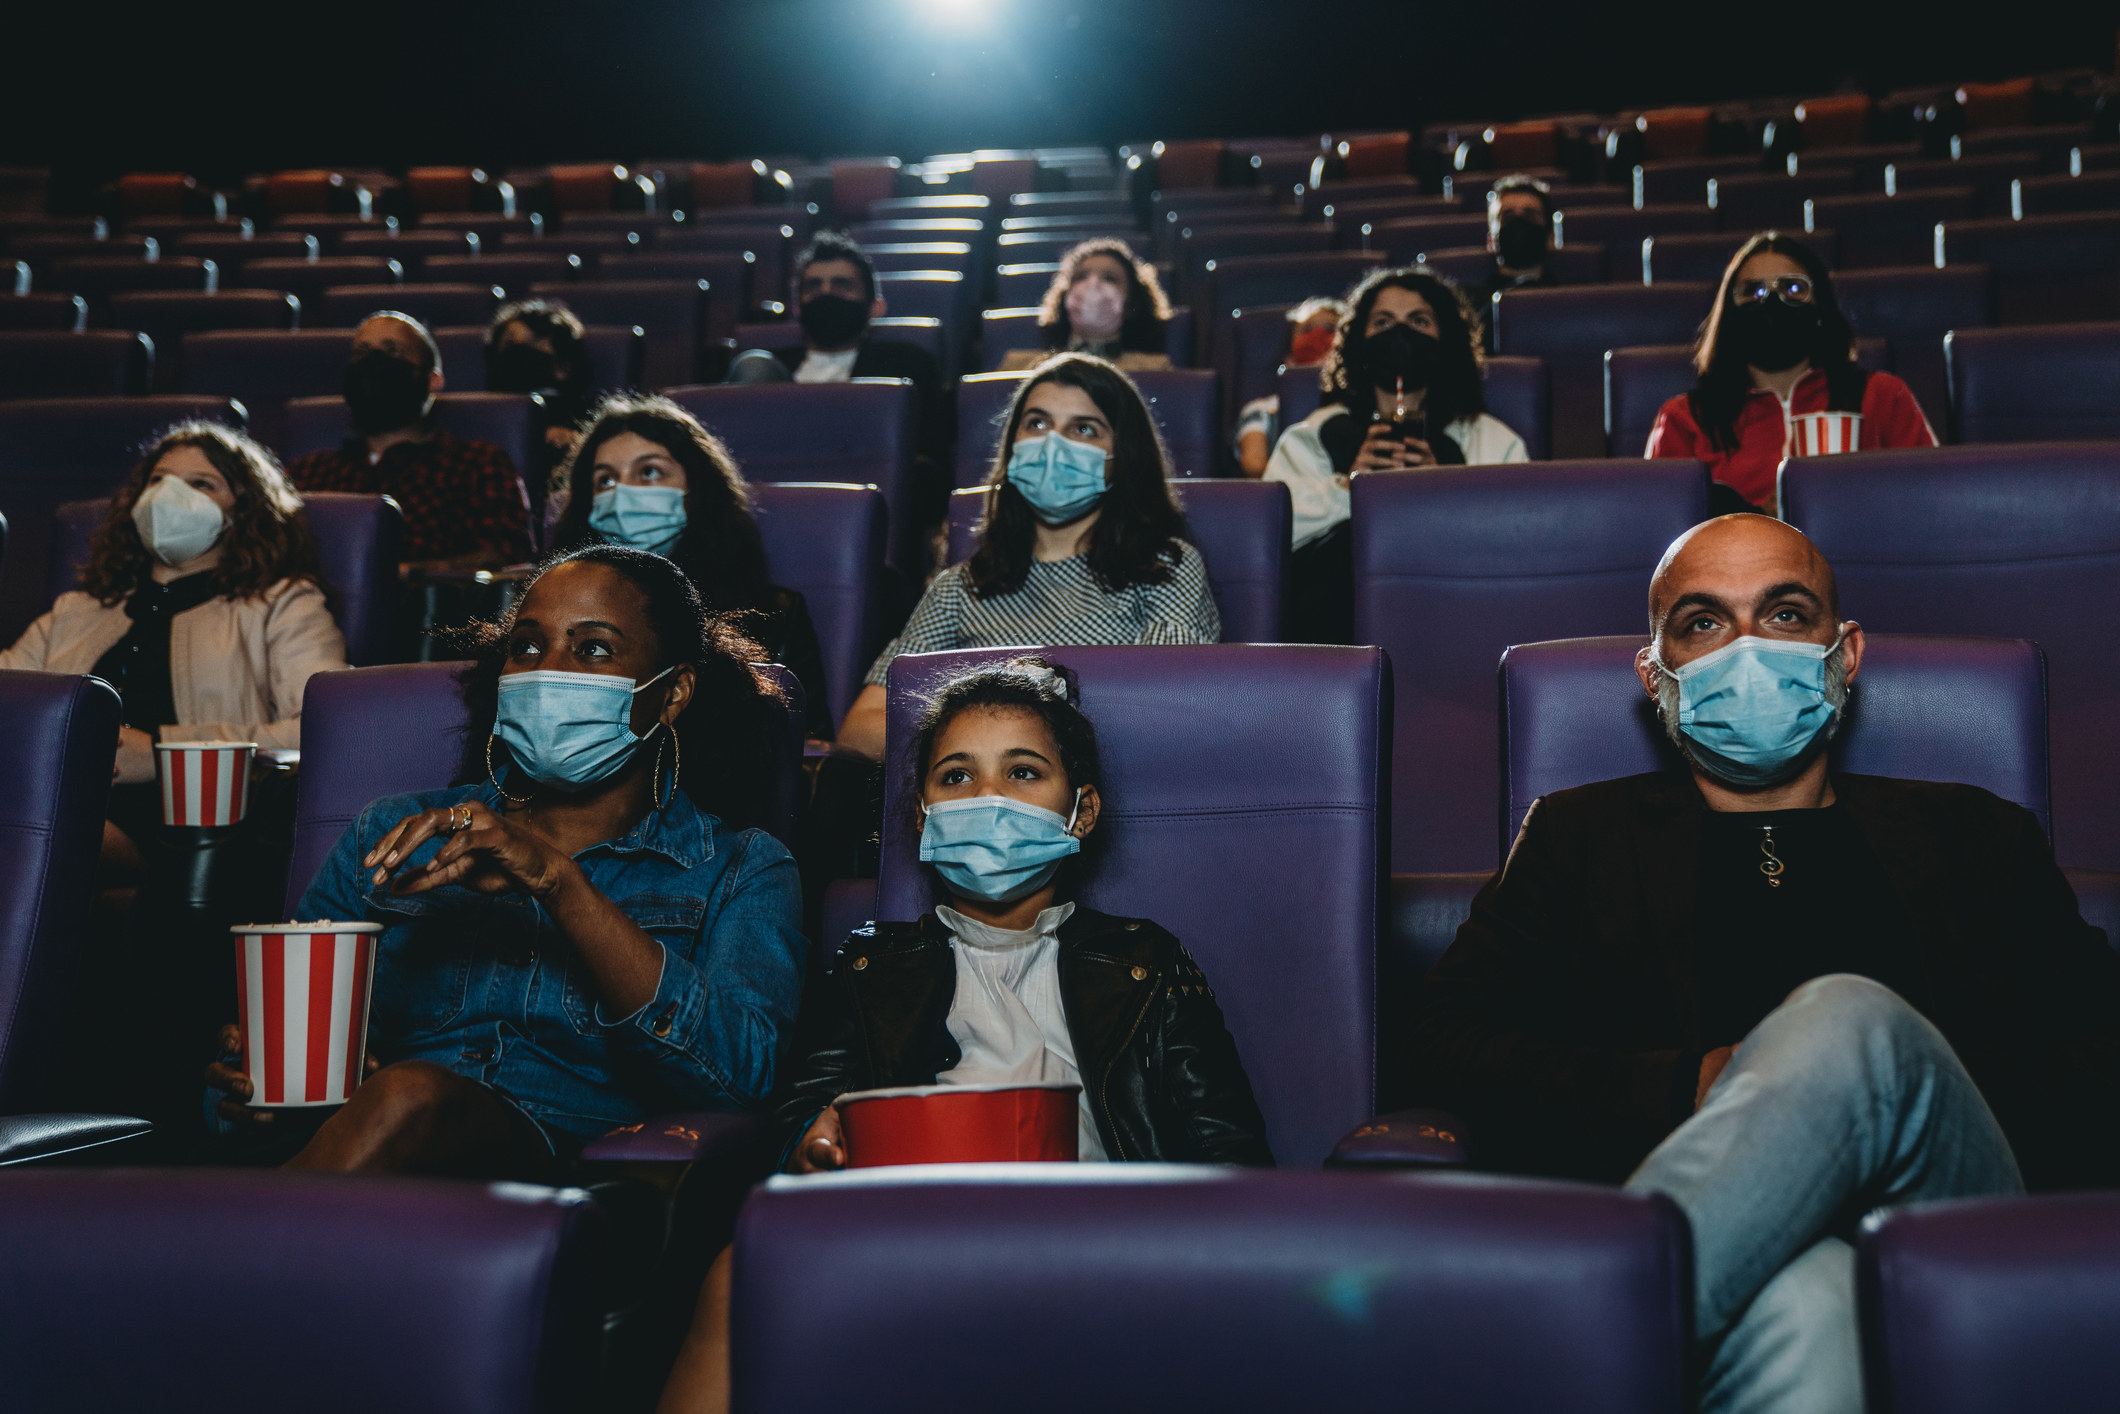 families social distancing in the cinema with masks on